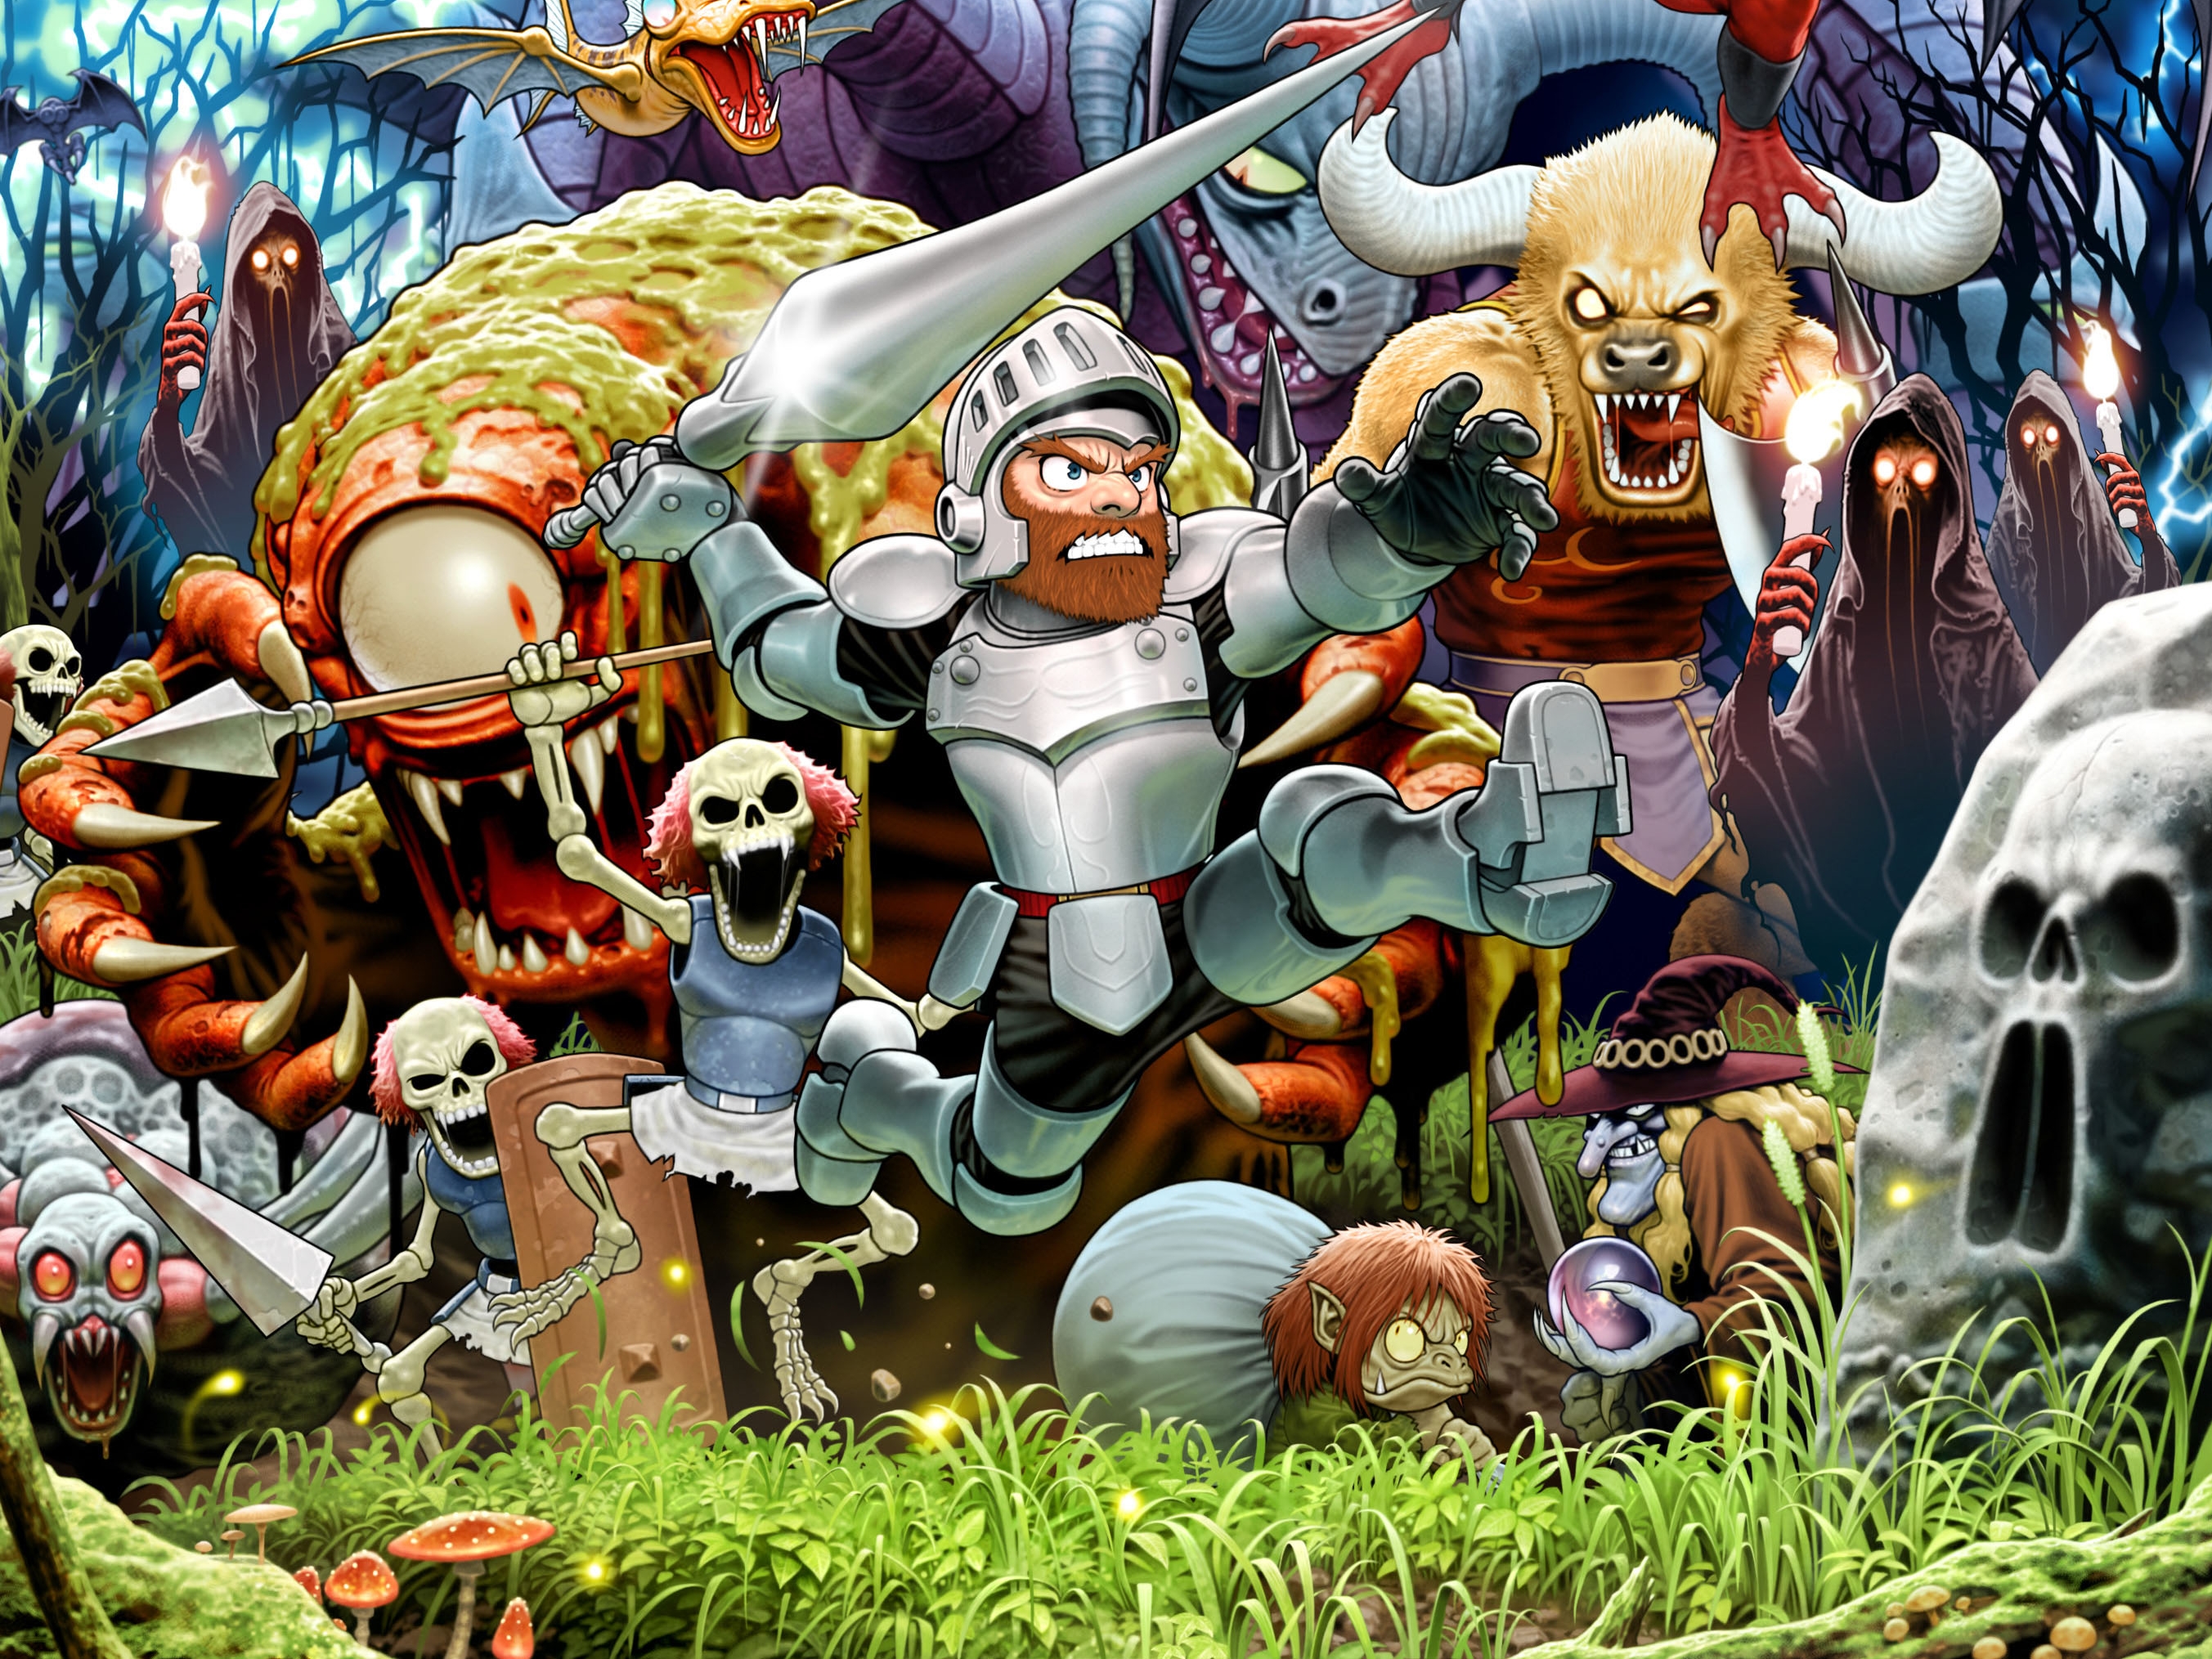 Promo Art, Illustration: Arthur, and other characters from Ghosts N' Goblins, are shown in aggressive poses facing forward; ready to attack.